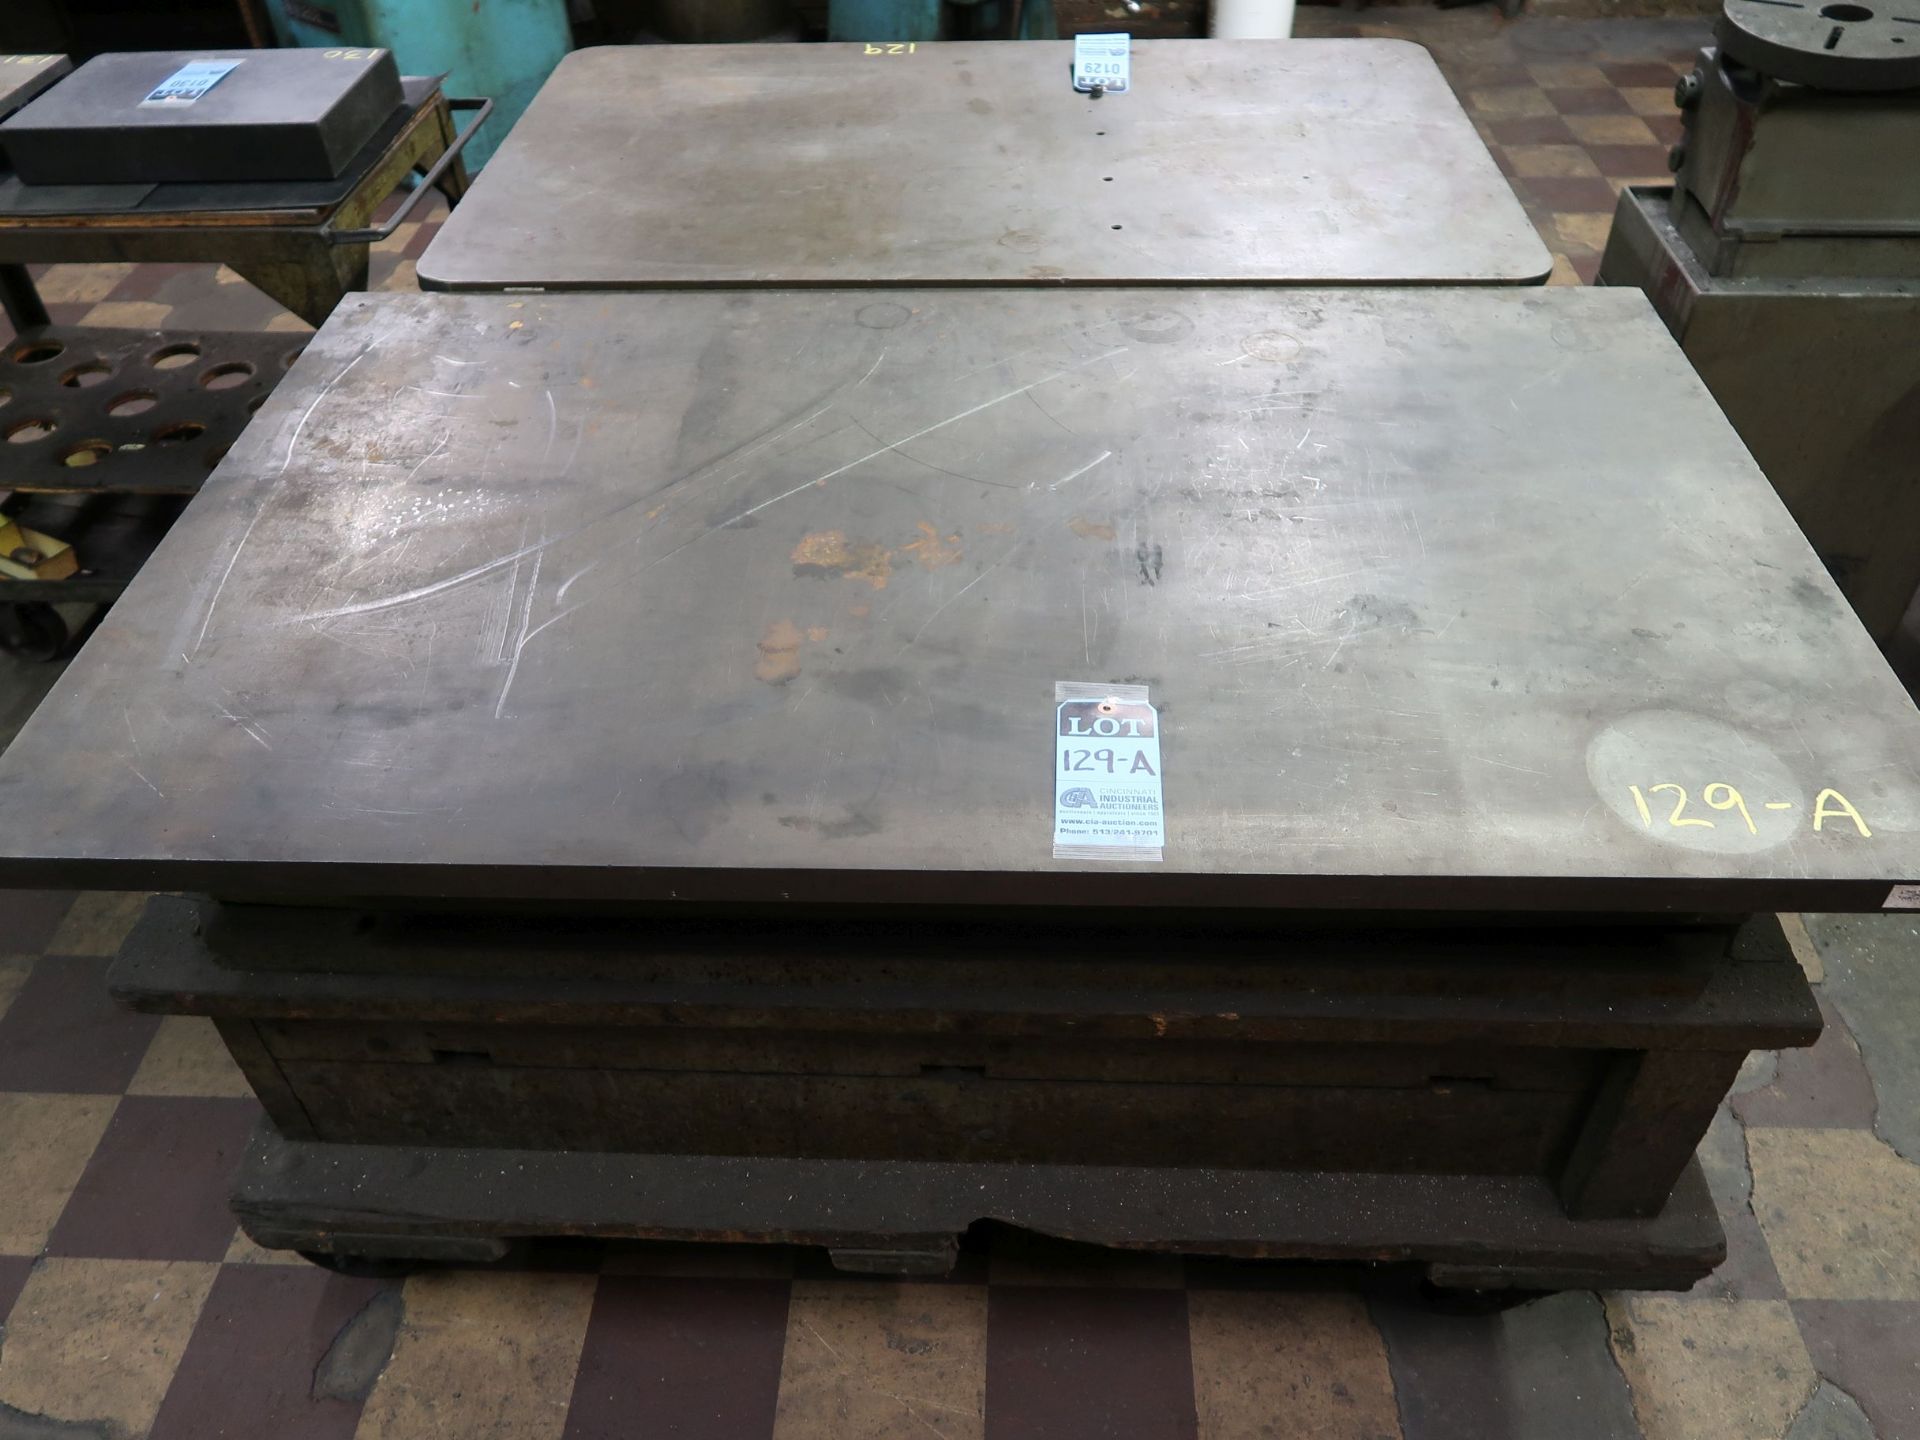 36" X 60" X 6" HIGH CAST IRON SURFACE PLATE WITH CART